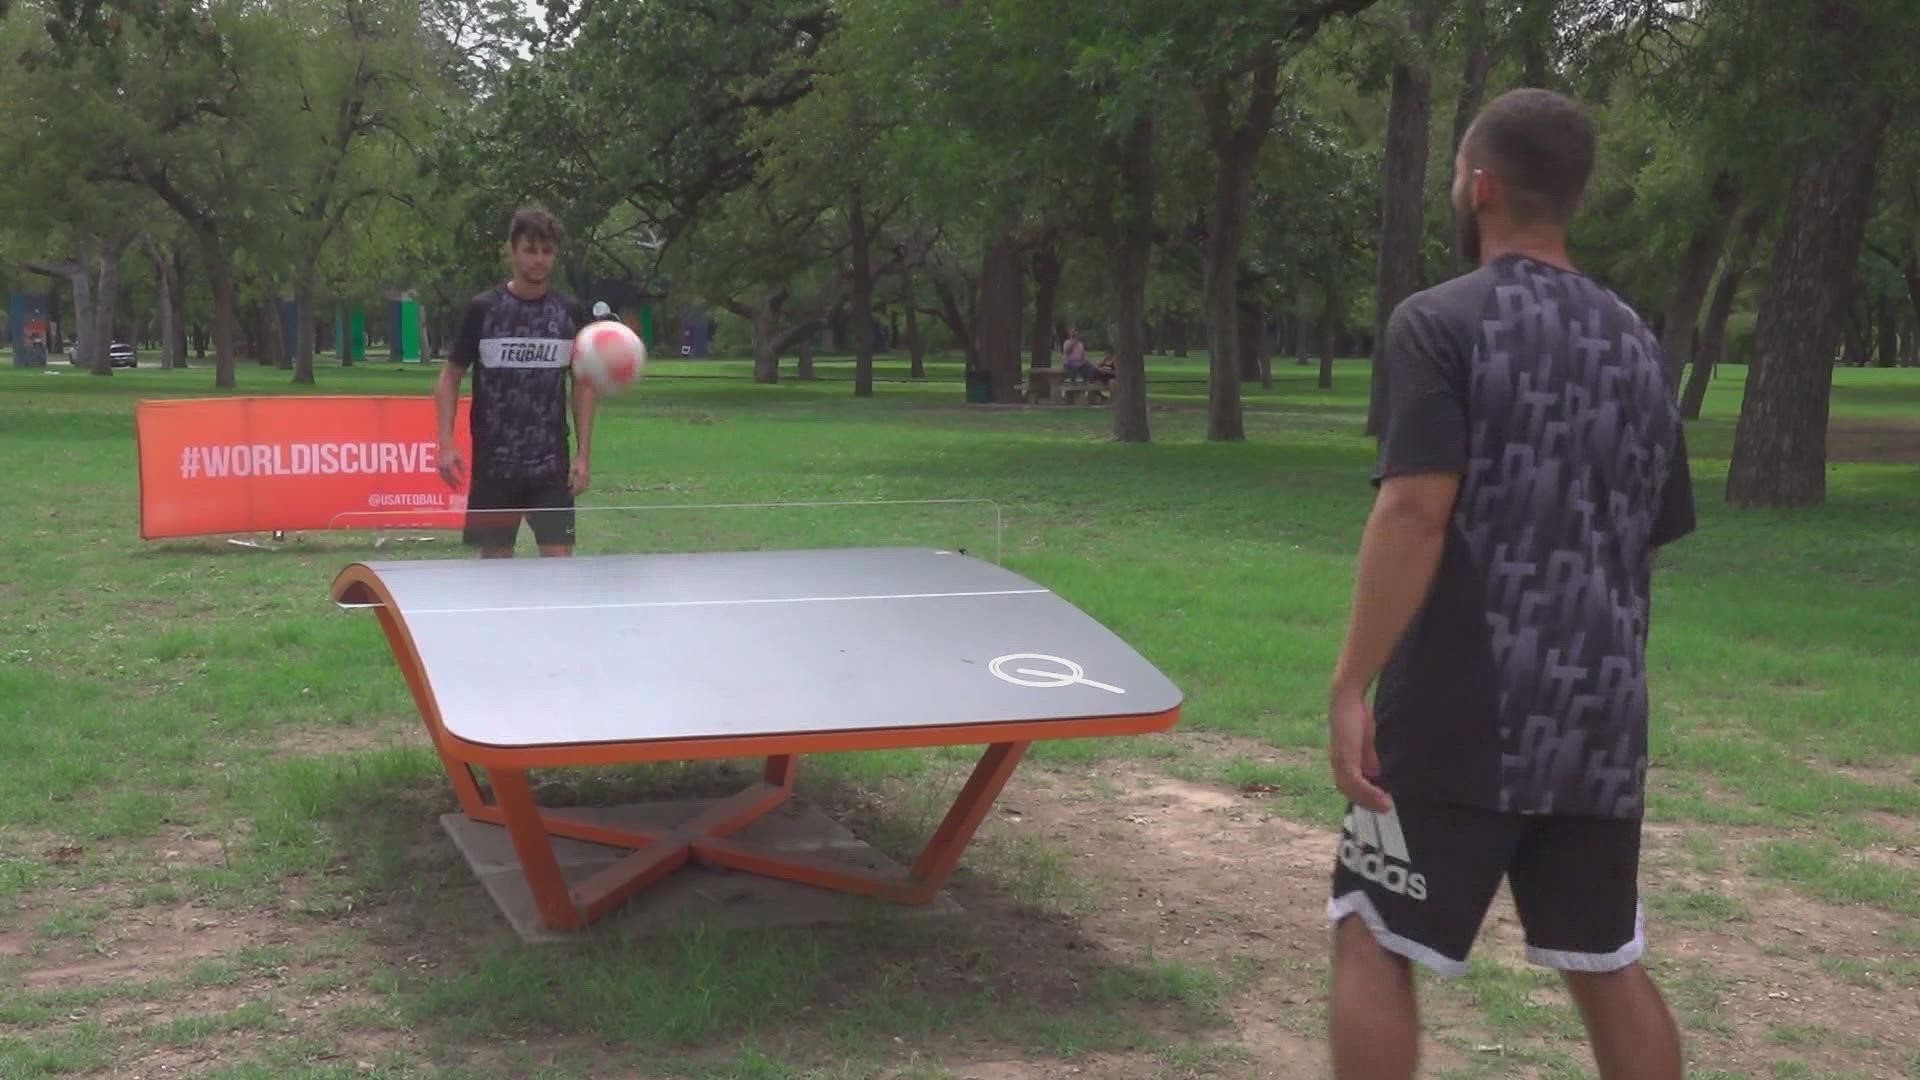 Teqball is essentially soccer on a ping pong table and it's catching on ... quickly.